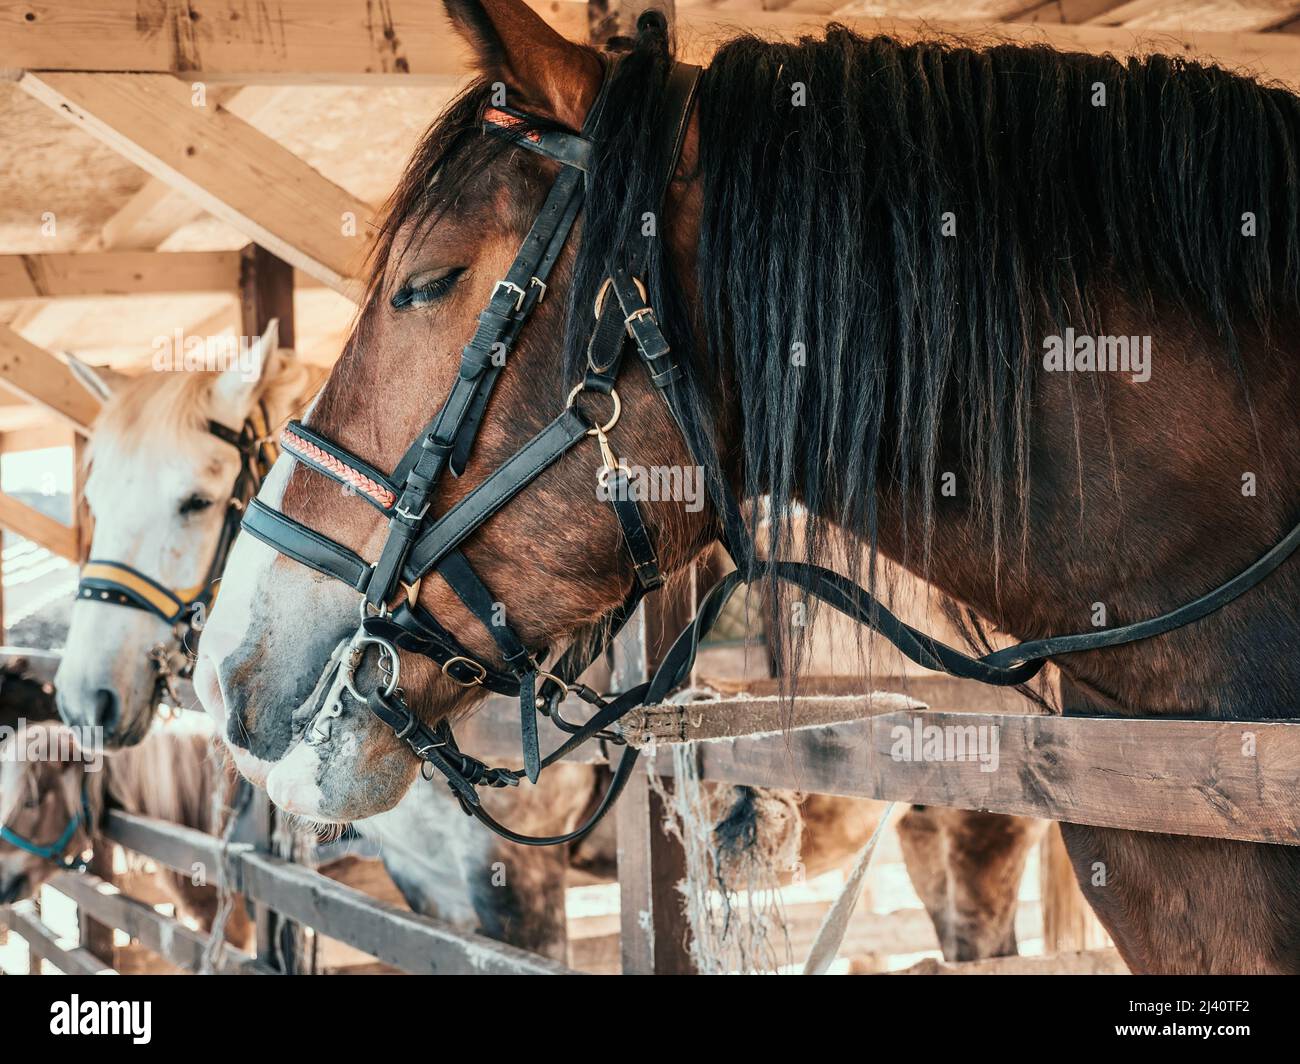 Beautiful horses stand in outdoor stall, close-up on animal head. Stock Photo